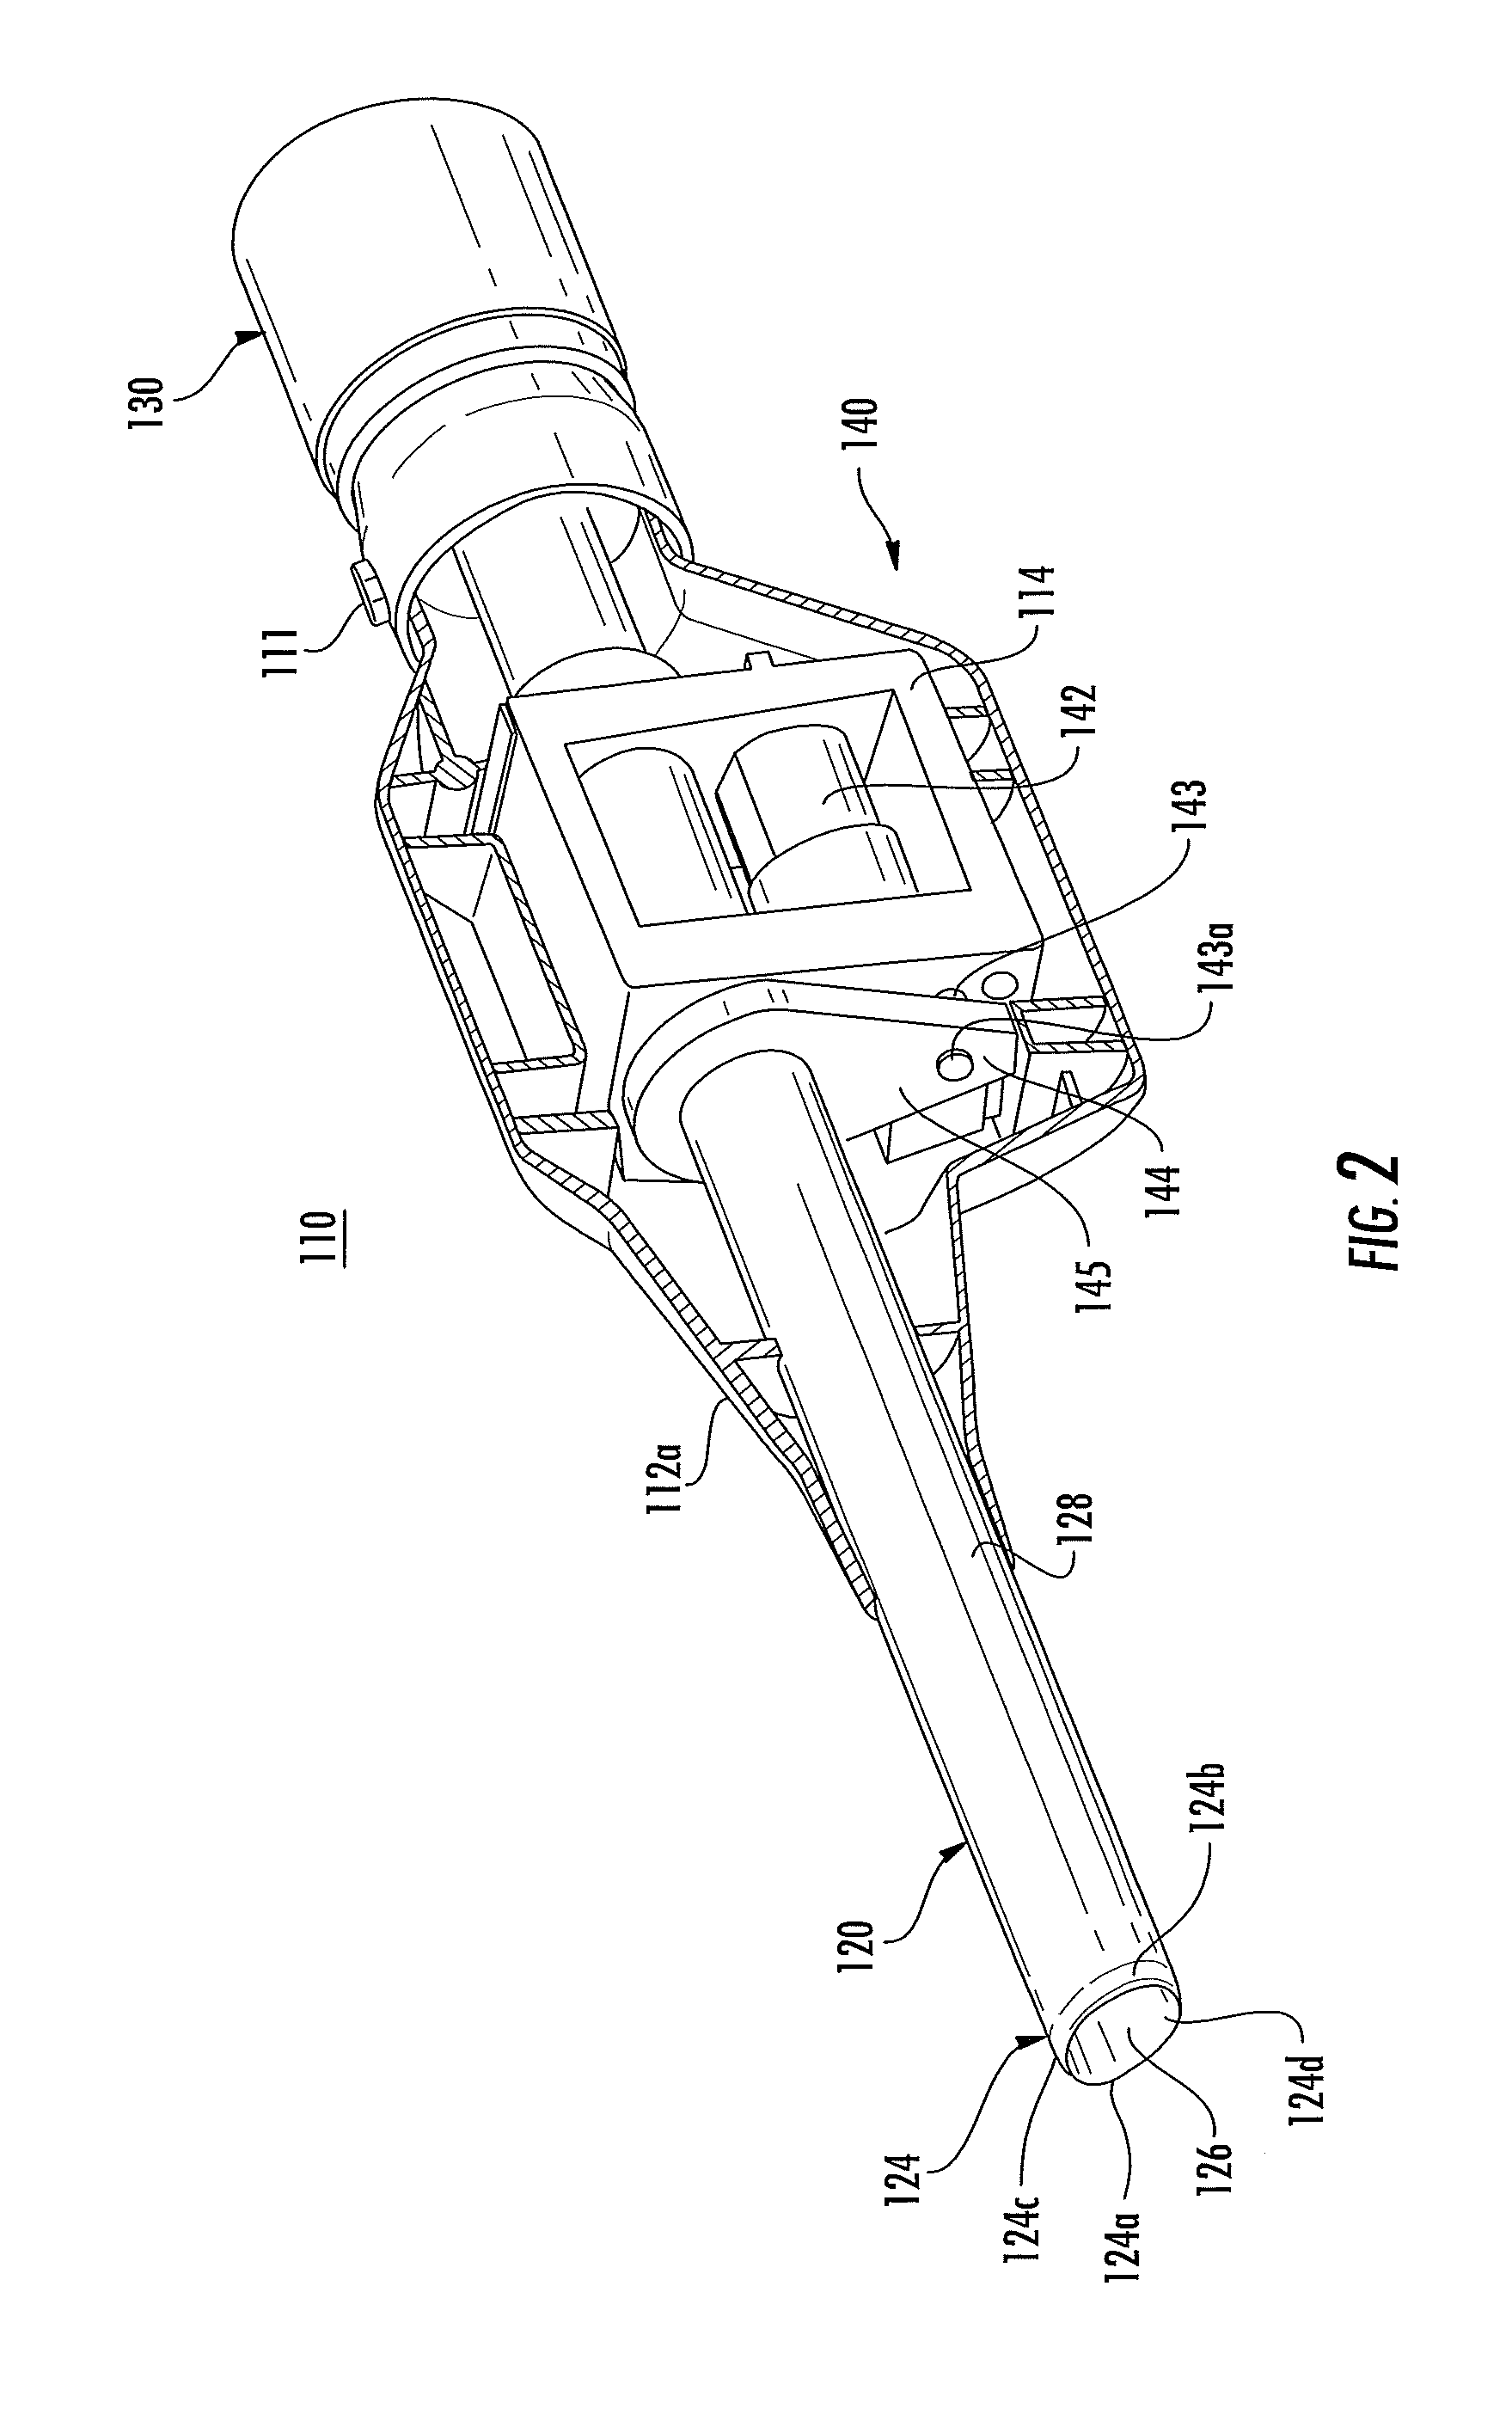 Devices, systems, and methods for tissue morcellation